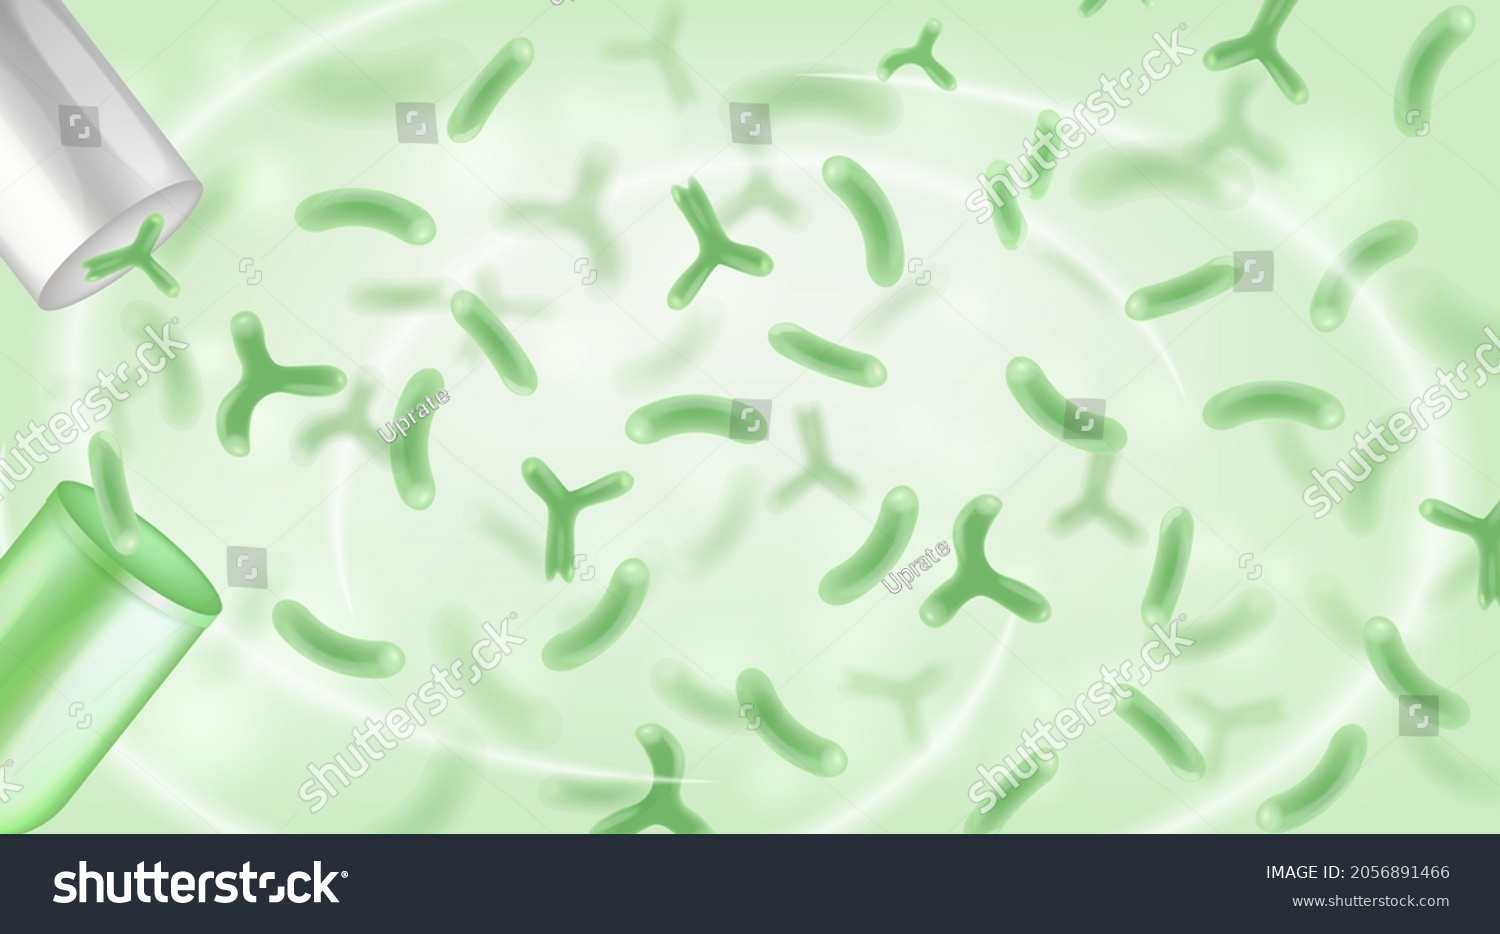 SVG of Microbiology science and medicine background. Bacterias, lactobacillus, Probiotic Microscopic microorganisms. Science background. svg